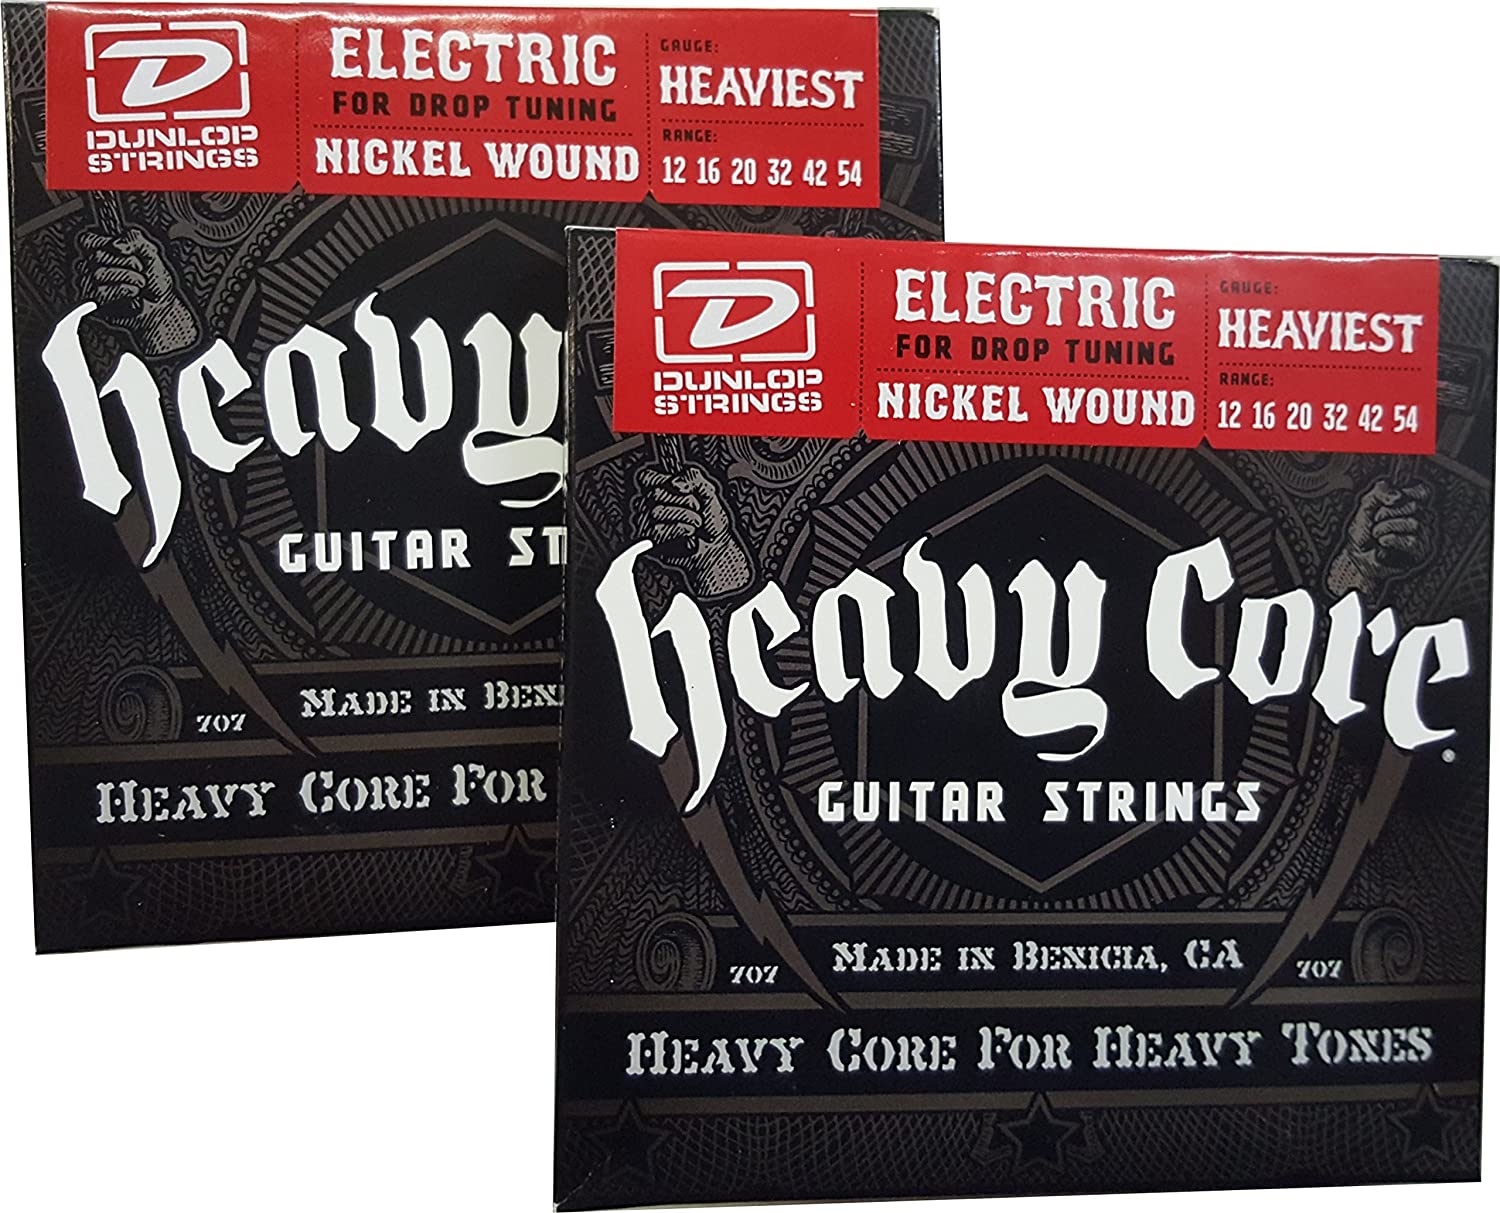 Dunlop Heavy Core Heaviest Electric Guitar Strings on a white background